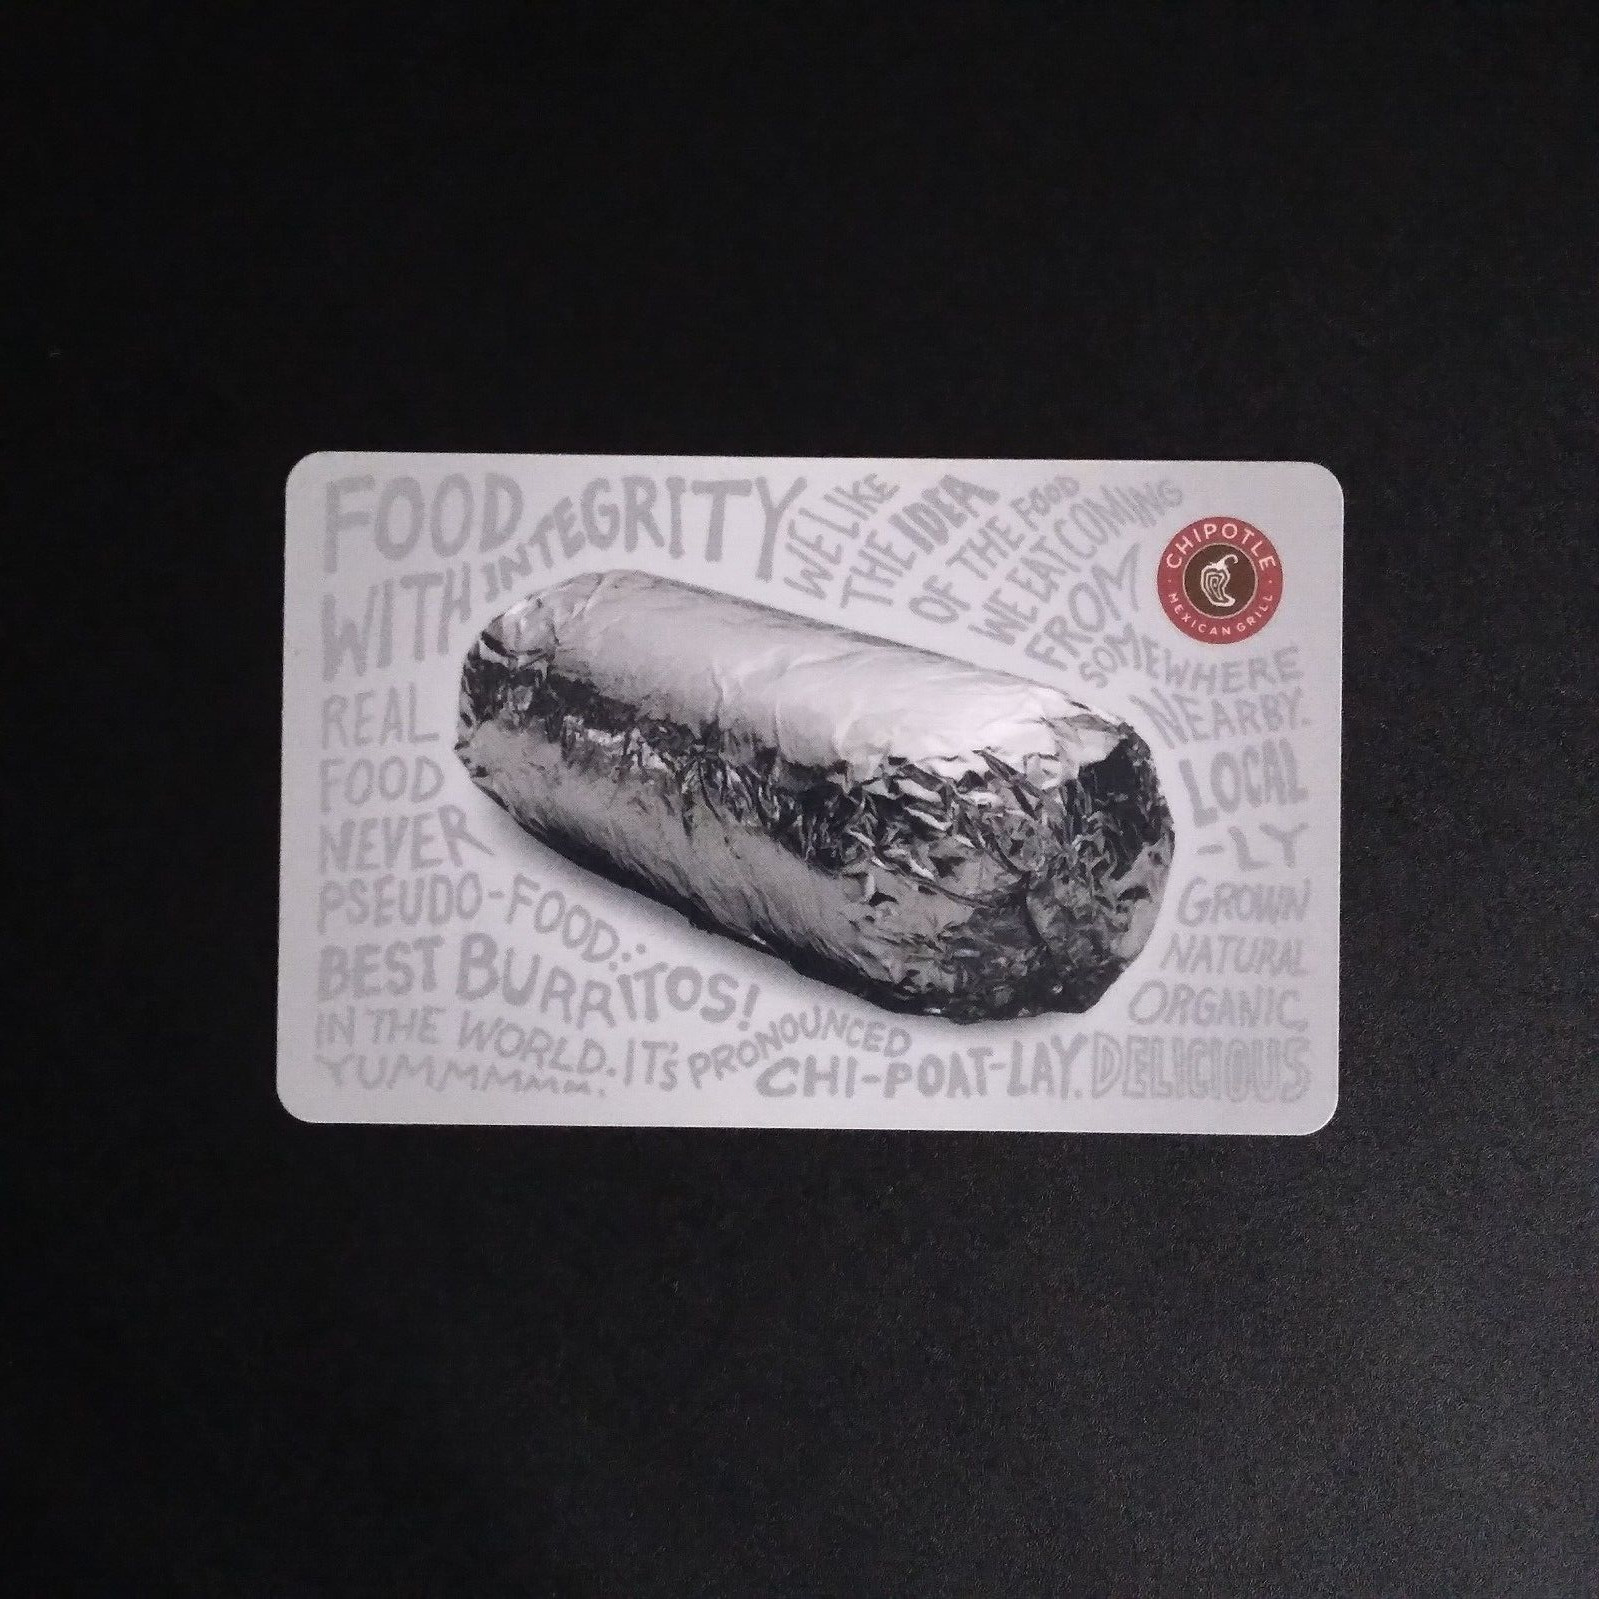 Chipotle Best Burrito NEW COLLECTIBLE 2011 GIFT CARD $0 #6076